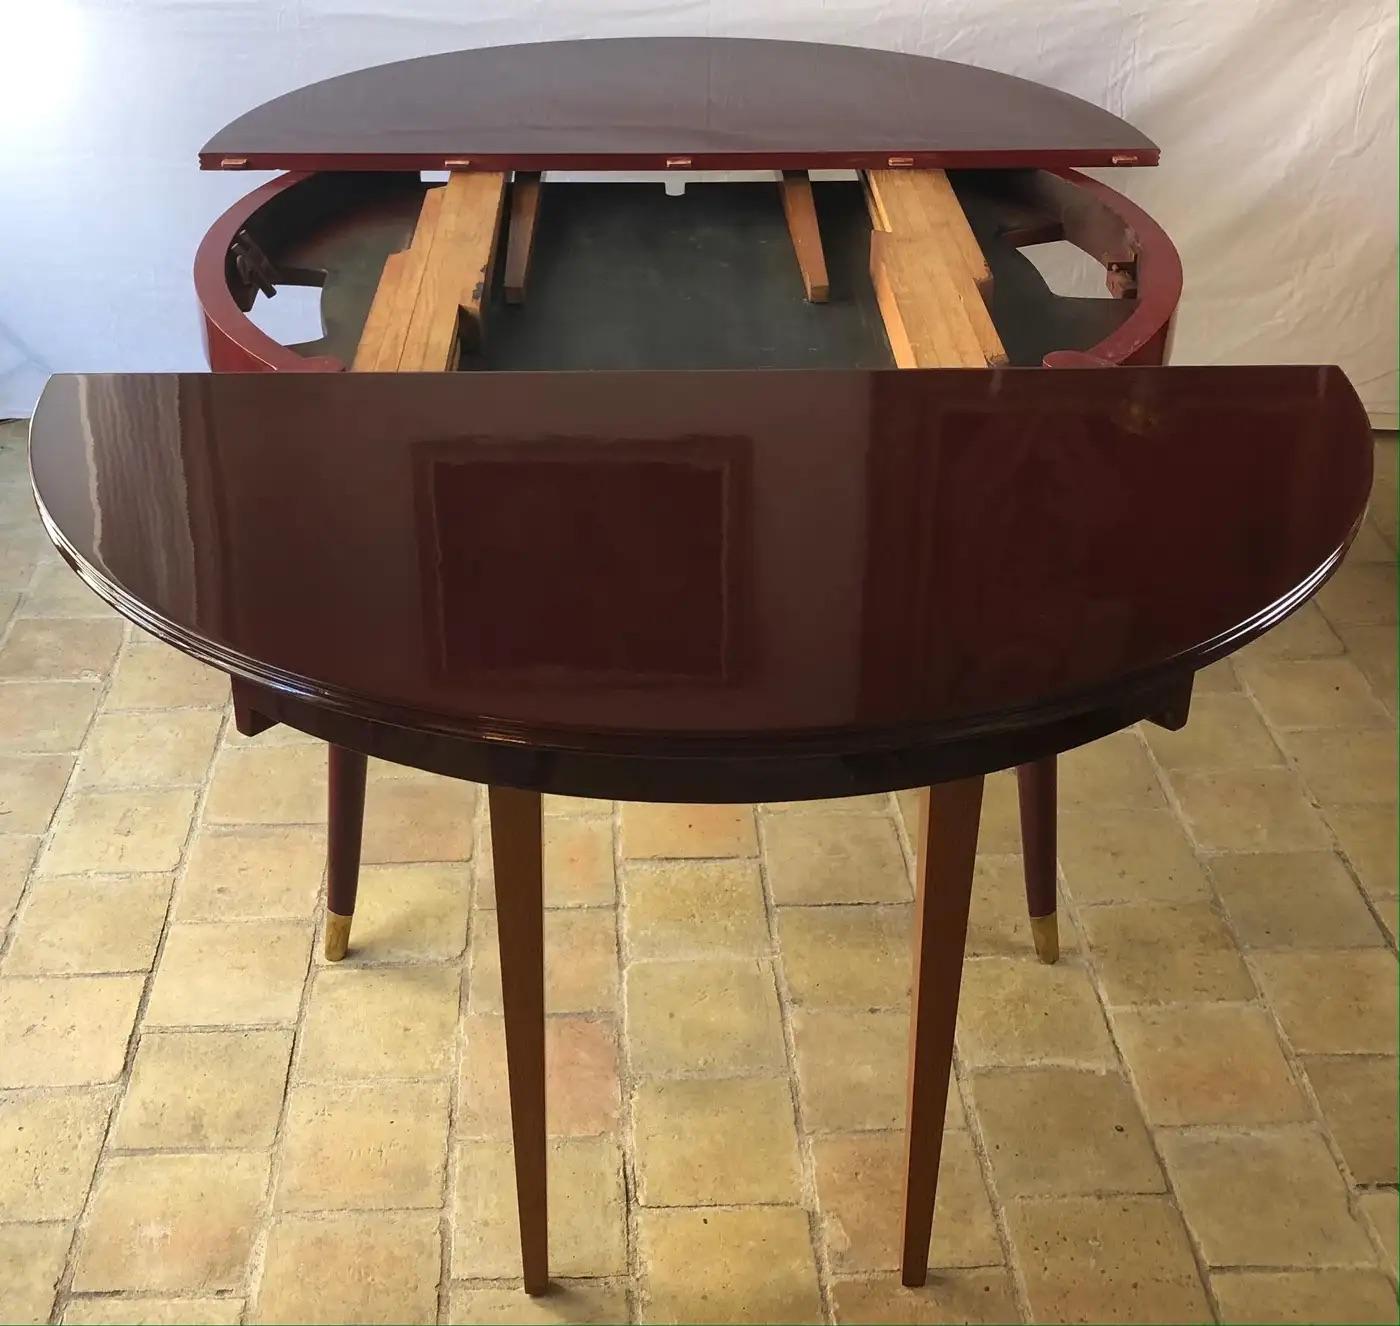 Italian Mid-Century Marvel:  Extendable Dining Table Attributed to Gio Ponti

A Statement Piece for Grand Gatherings: 

This captivating extendable dining table, attributed to the legendary Italian designer Gio Ponti, offers a remarkable blend of